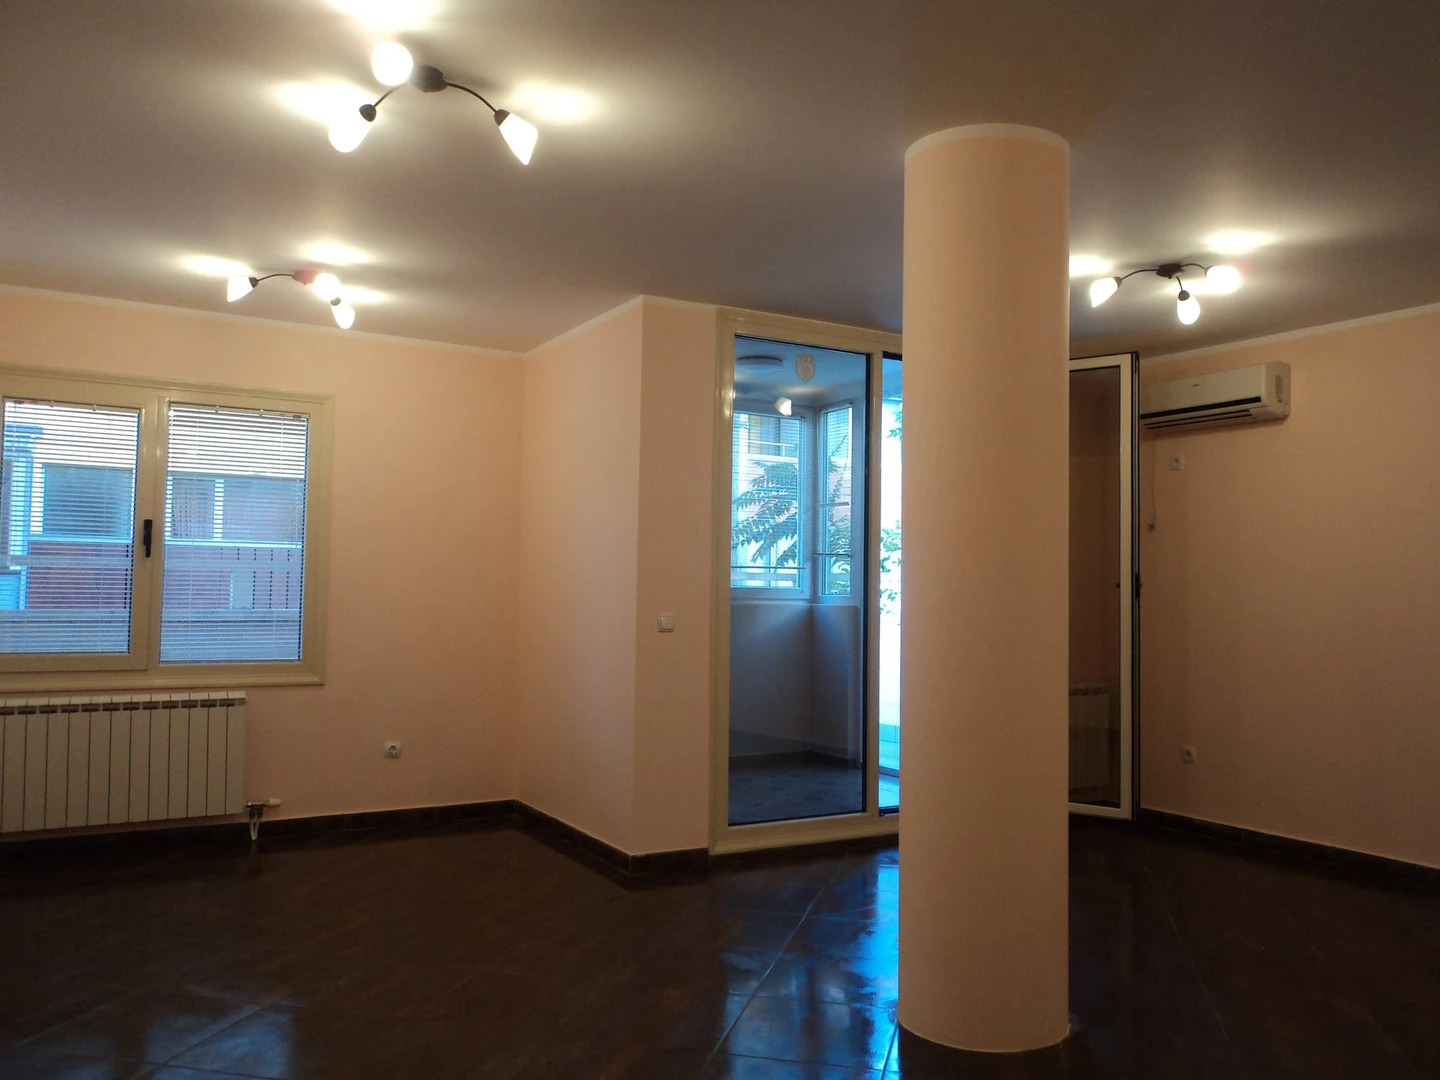 Accommodation with 3 bedrooms in Sofia